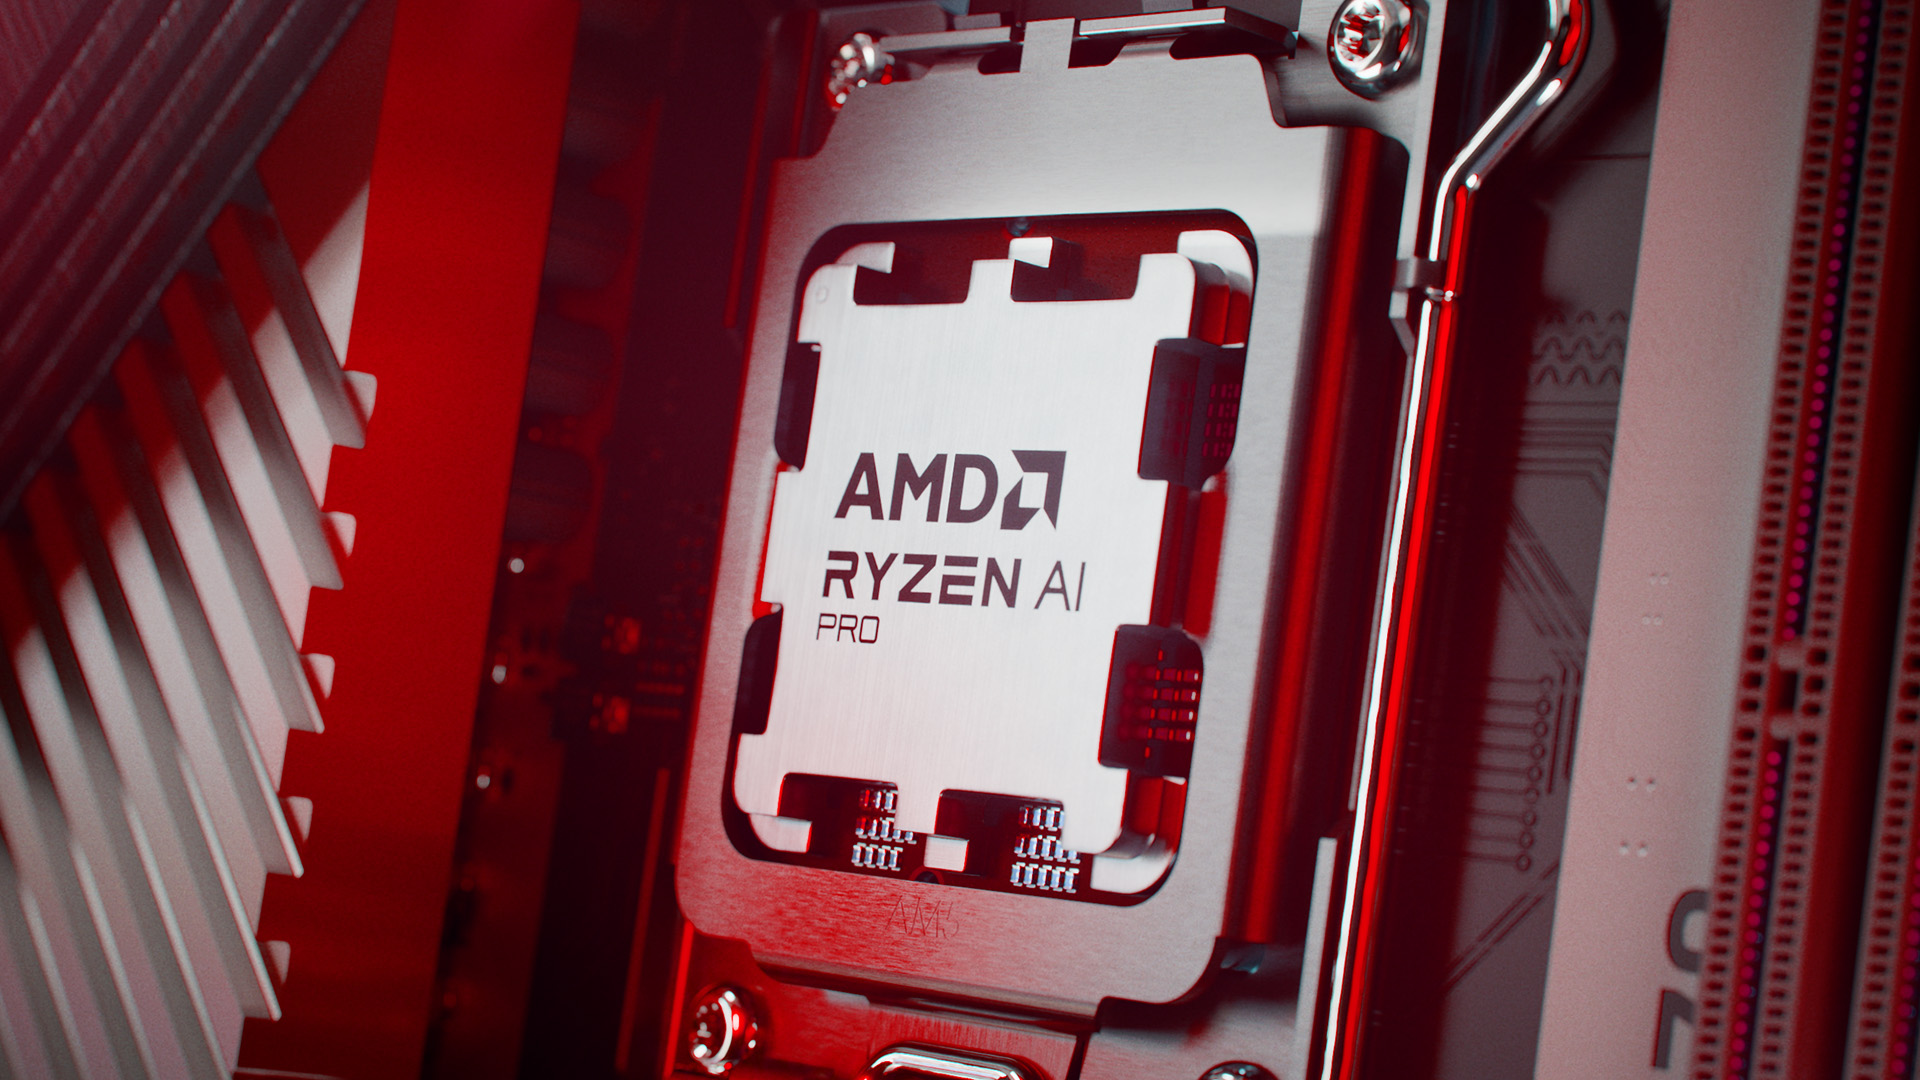 AMD-powered Ryzen PRO AI PCs will allow businesses to access local NPU processing with apps from Microsoft, Adobe, and more